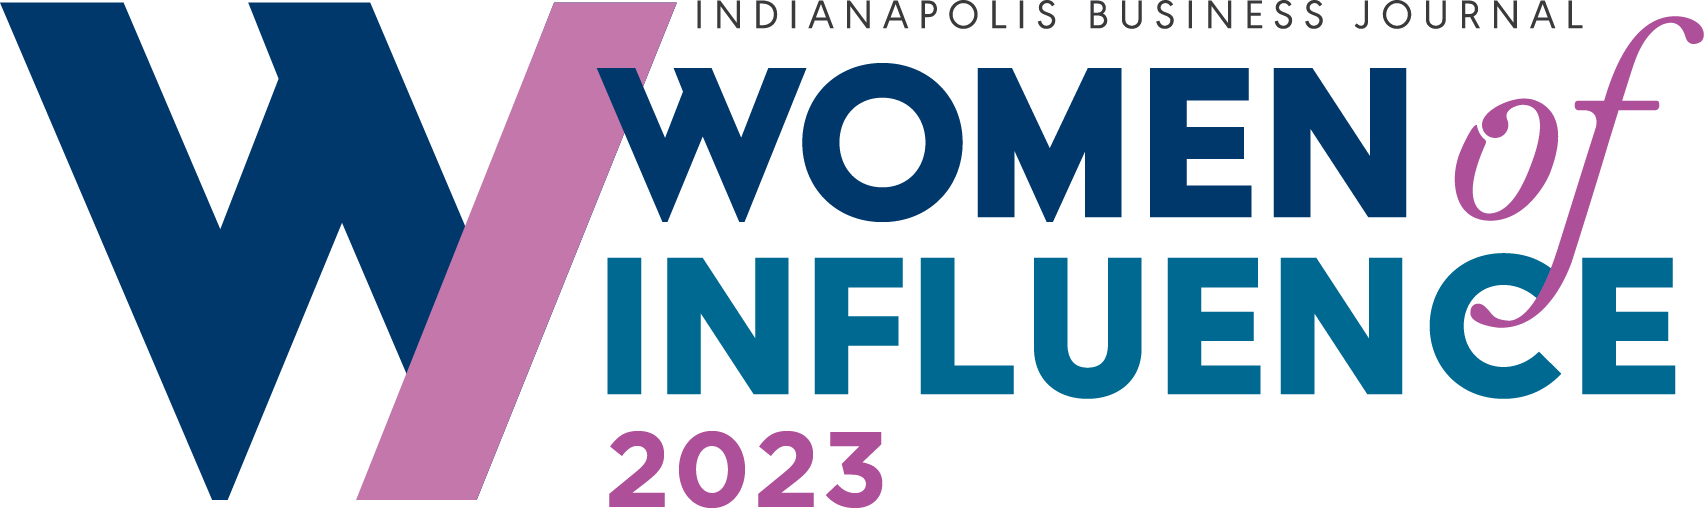 Indianapolis Business Journal Women of Influence, 2023